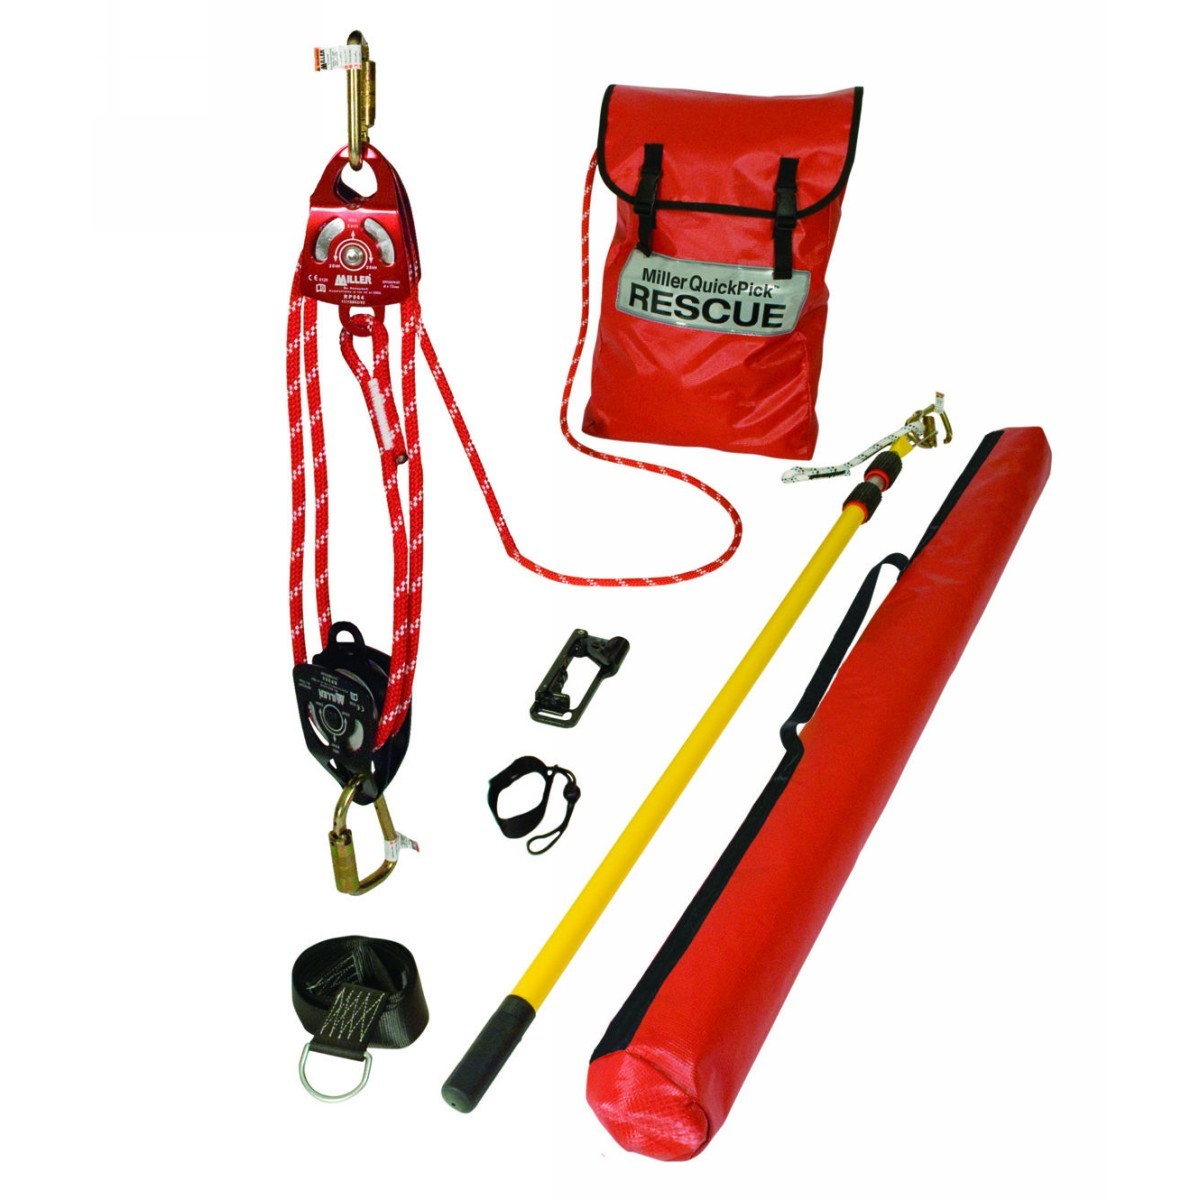 Honeywell Miller® QuickPick™ Rescue Kit With 50' Polyamide Kernmantle Rope (310 lbs Weight Capacity)